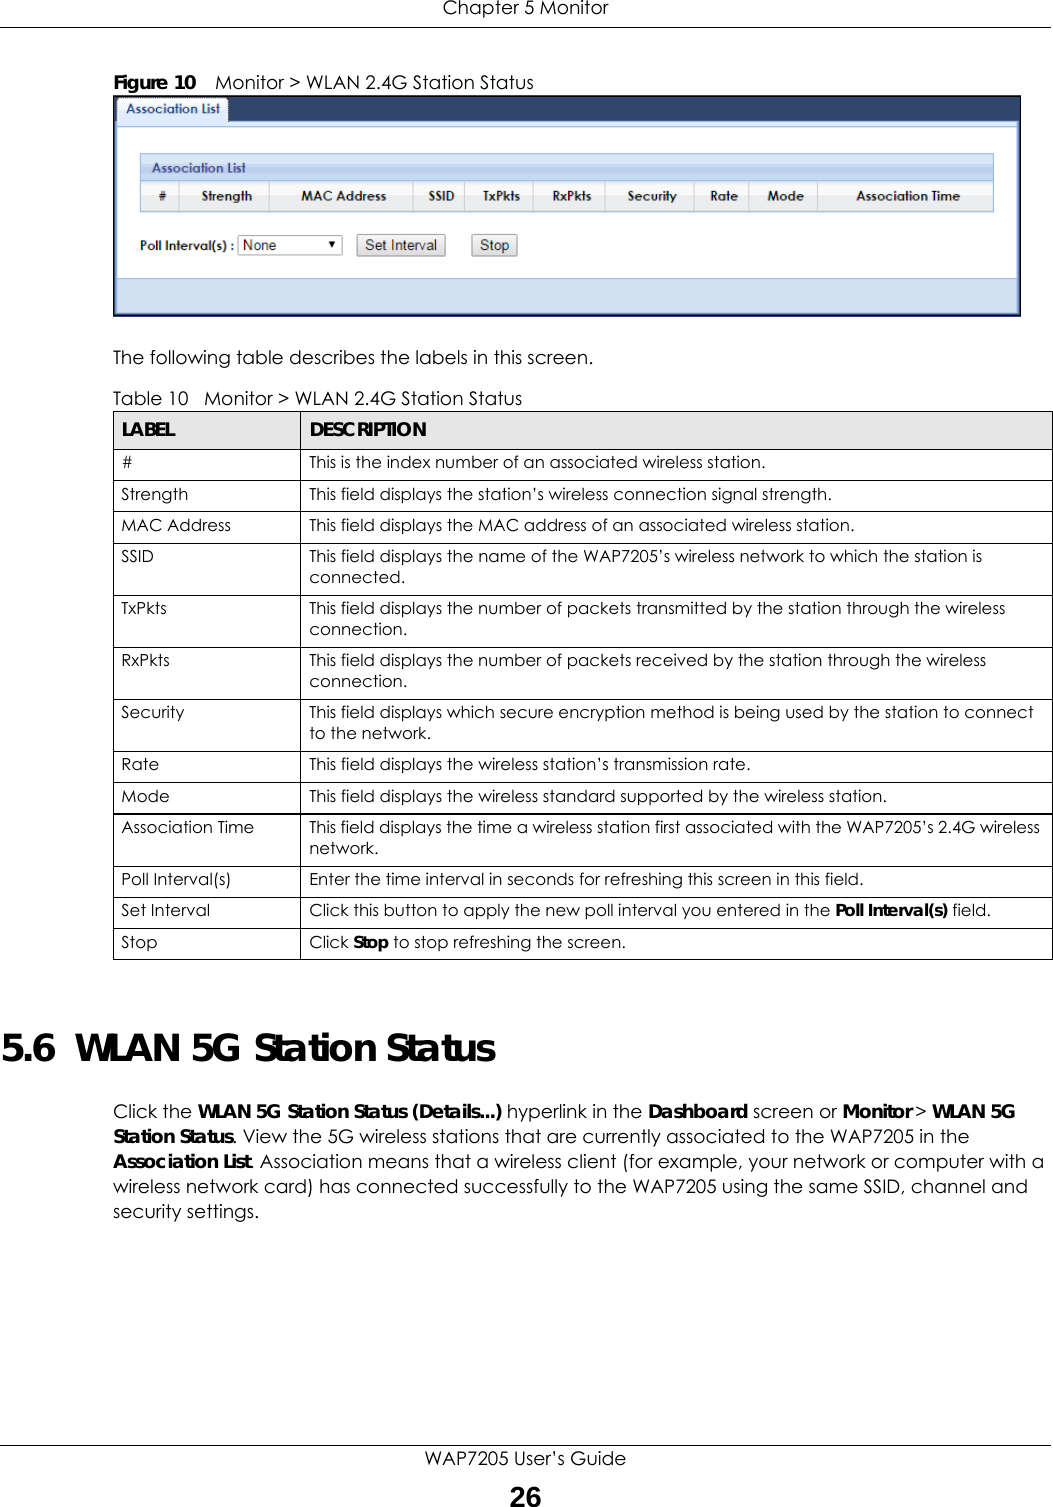 Chapter 5 MonitorWAP7205 User’s Guide26Figure 10    Monitor &gt; WLAN 2.4G Station Status The following table describes the labels in this screen.5.6  WLAN 5G Station StatusClick the WLAN 5G Station Status (Details...) hyperlink in the Dashboard screen or Monitor &gt; WLAN 5G Station Status. View the 5G wireless stations that are currently associated to the WAP7205 in the Association List. Association means that a wireless client (for example, your network or computer with a wireless network card) has connected successfully to the WAP7205 using the same SSID, channel and security settings.Table 10   Monitor &gt; WLAN 2.4G Station StatusLABEL DESCRIPTION#  This is the index number of an associated wireless station. Strength This field displays the station’s wireless connection signal strength.MAC Address  This field displays the MAC address of an associated wireless station.SSID This field displays the name of the WAP7205’s wireless network to which the station is connected.TxPkts This field displays the number of packets transmitted by the station through the wireless connection.RxPkts This field displays the number of packets received by the station through the wireless connection.Security This field displays which secure encryption method is being used by the station to connect to the network.Rate This field displays the wireless station’s transmission rate.Mode This field displays the wireless standard supported by the wireless station.Association Time This field displays the time a wireless station first associated with the WAP7205’s 2.4G wireless network.Poll Interval(s) Enter the time interval in seconds for refreshing this screen in this field.Set Interval Click this button to apply the new poll interval you entered in the Poll Interval(s) field.Stop Click Stop to stop refreshing the screen.